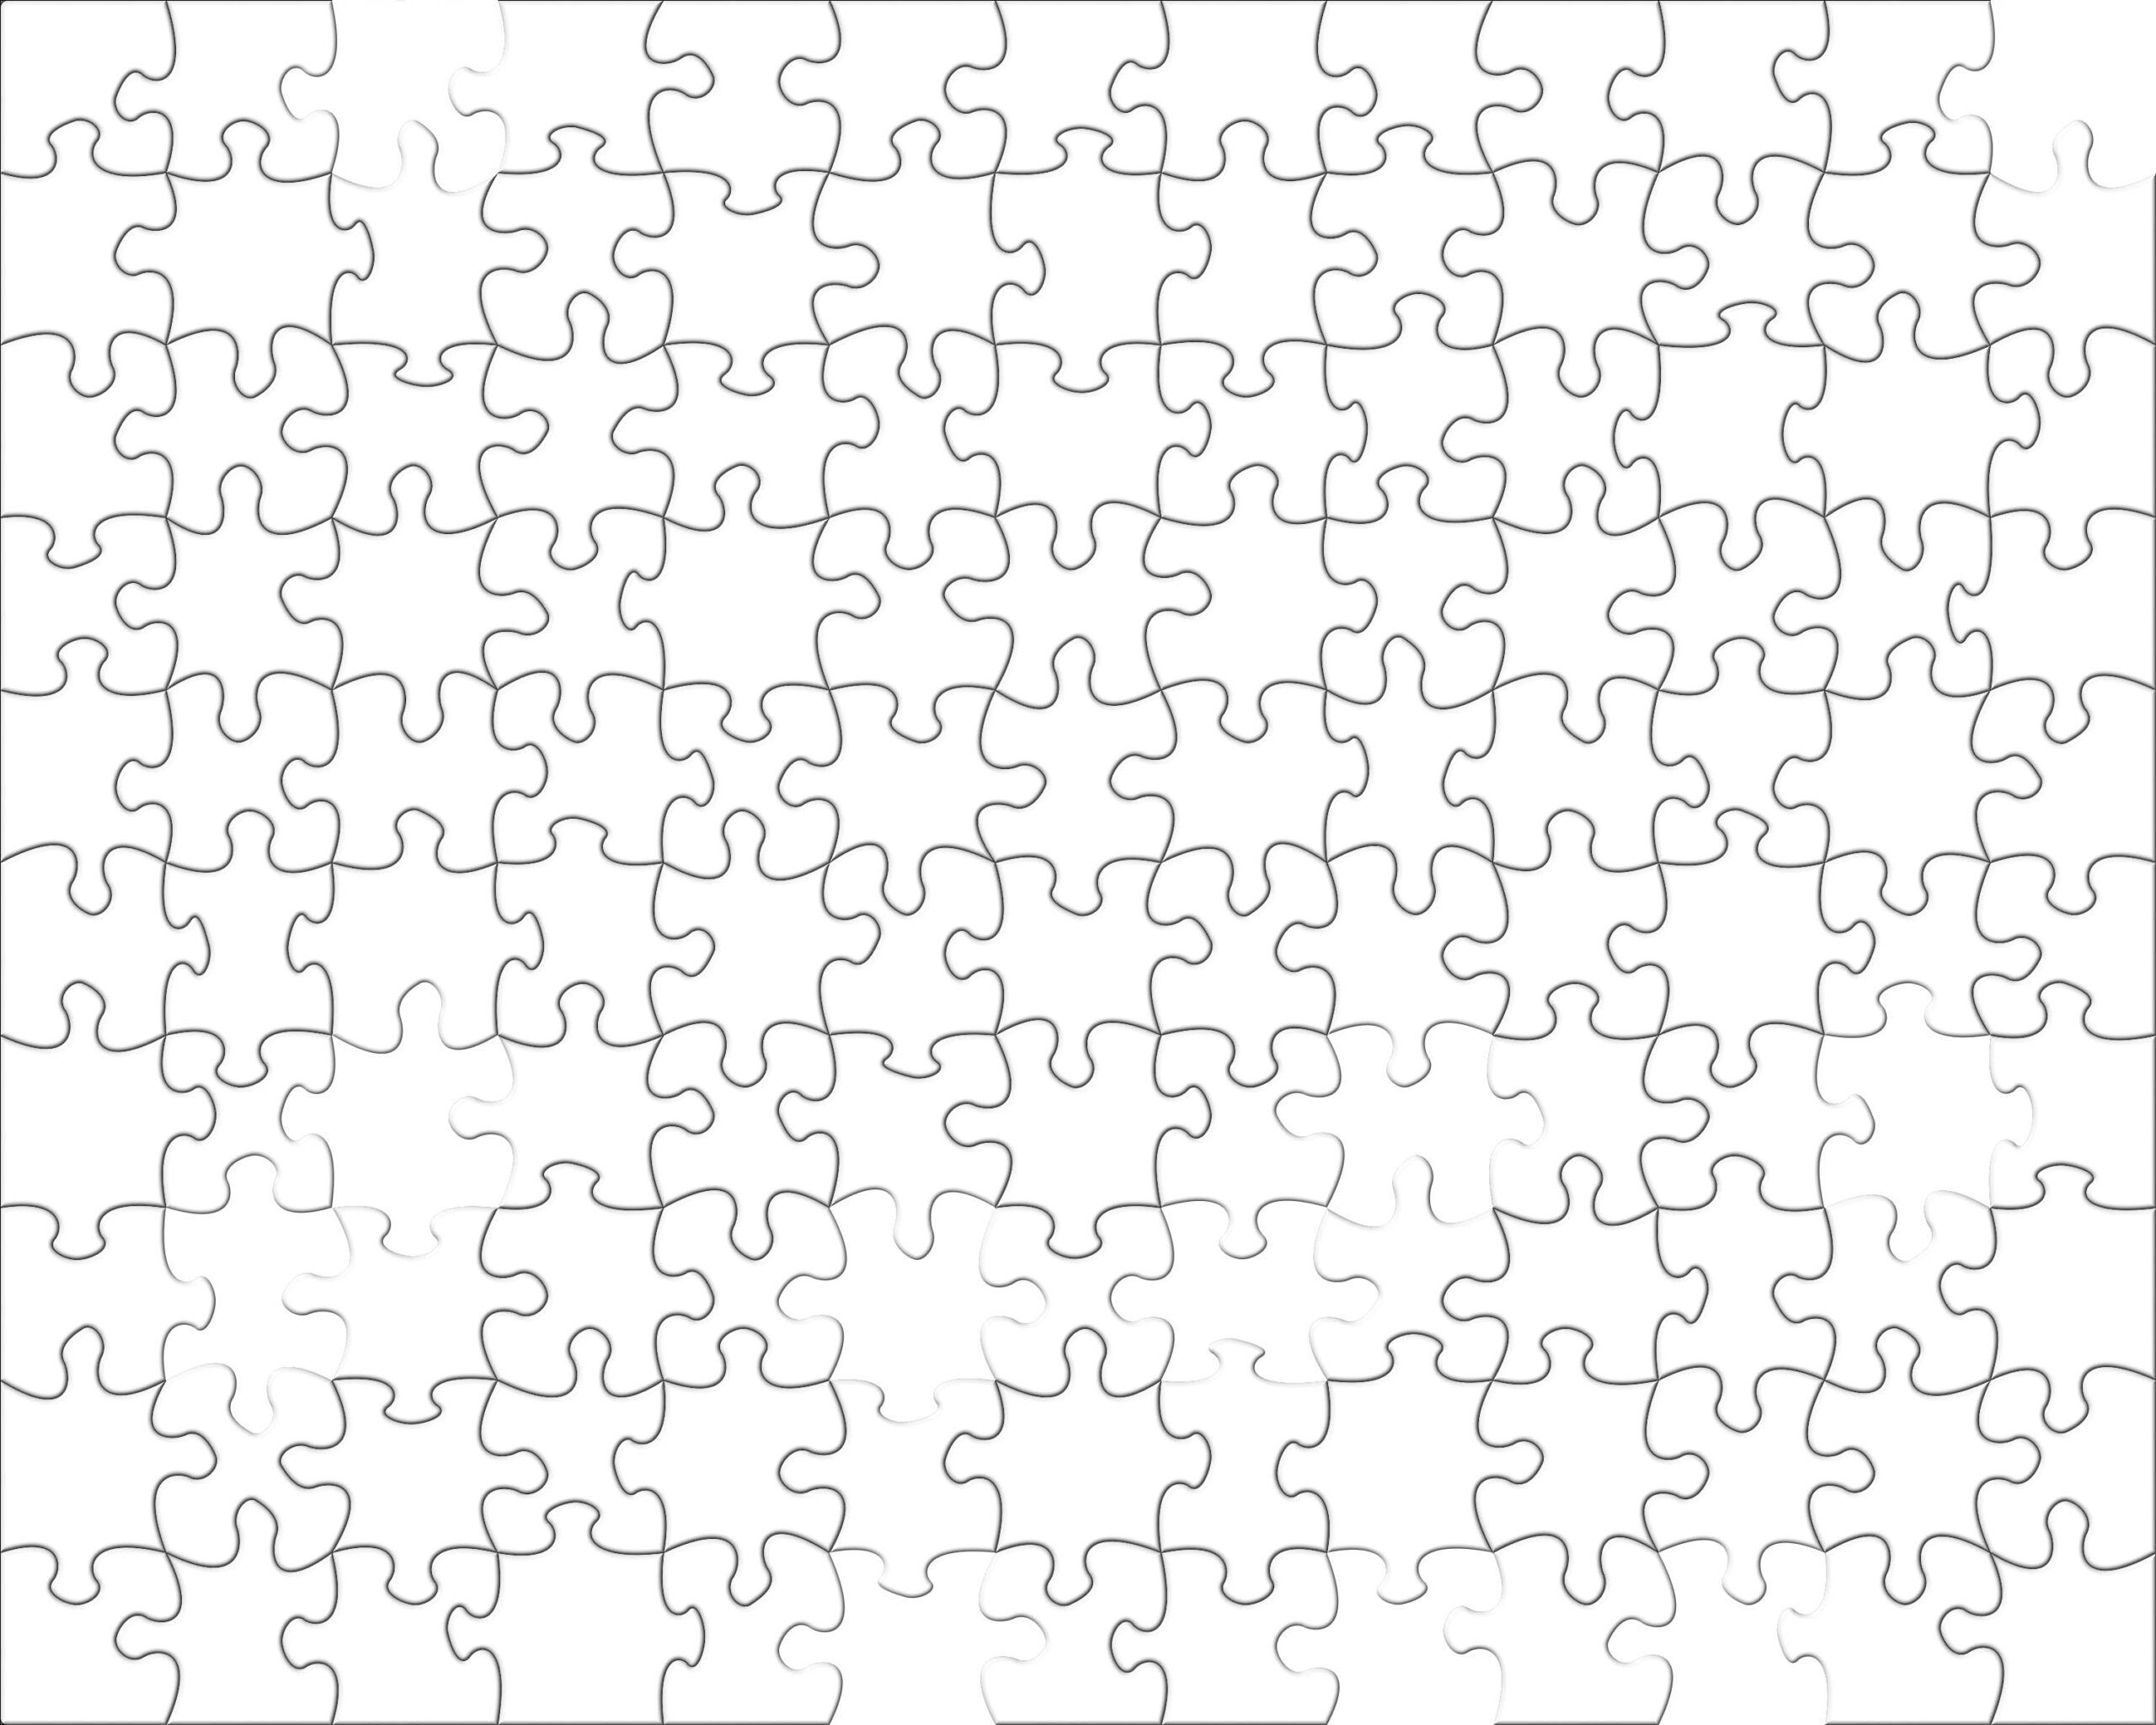 The Impossible Blank Puzzle – DOMAGRON